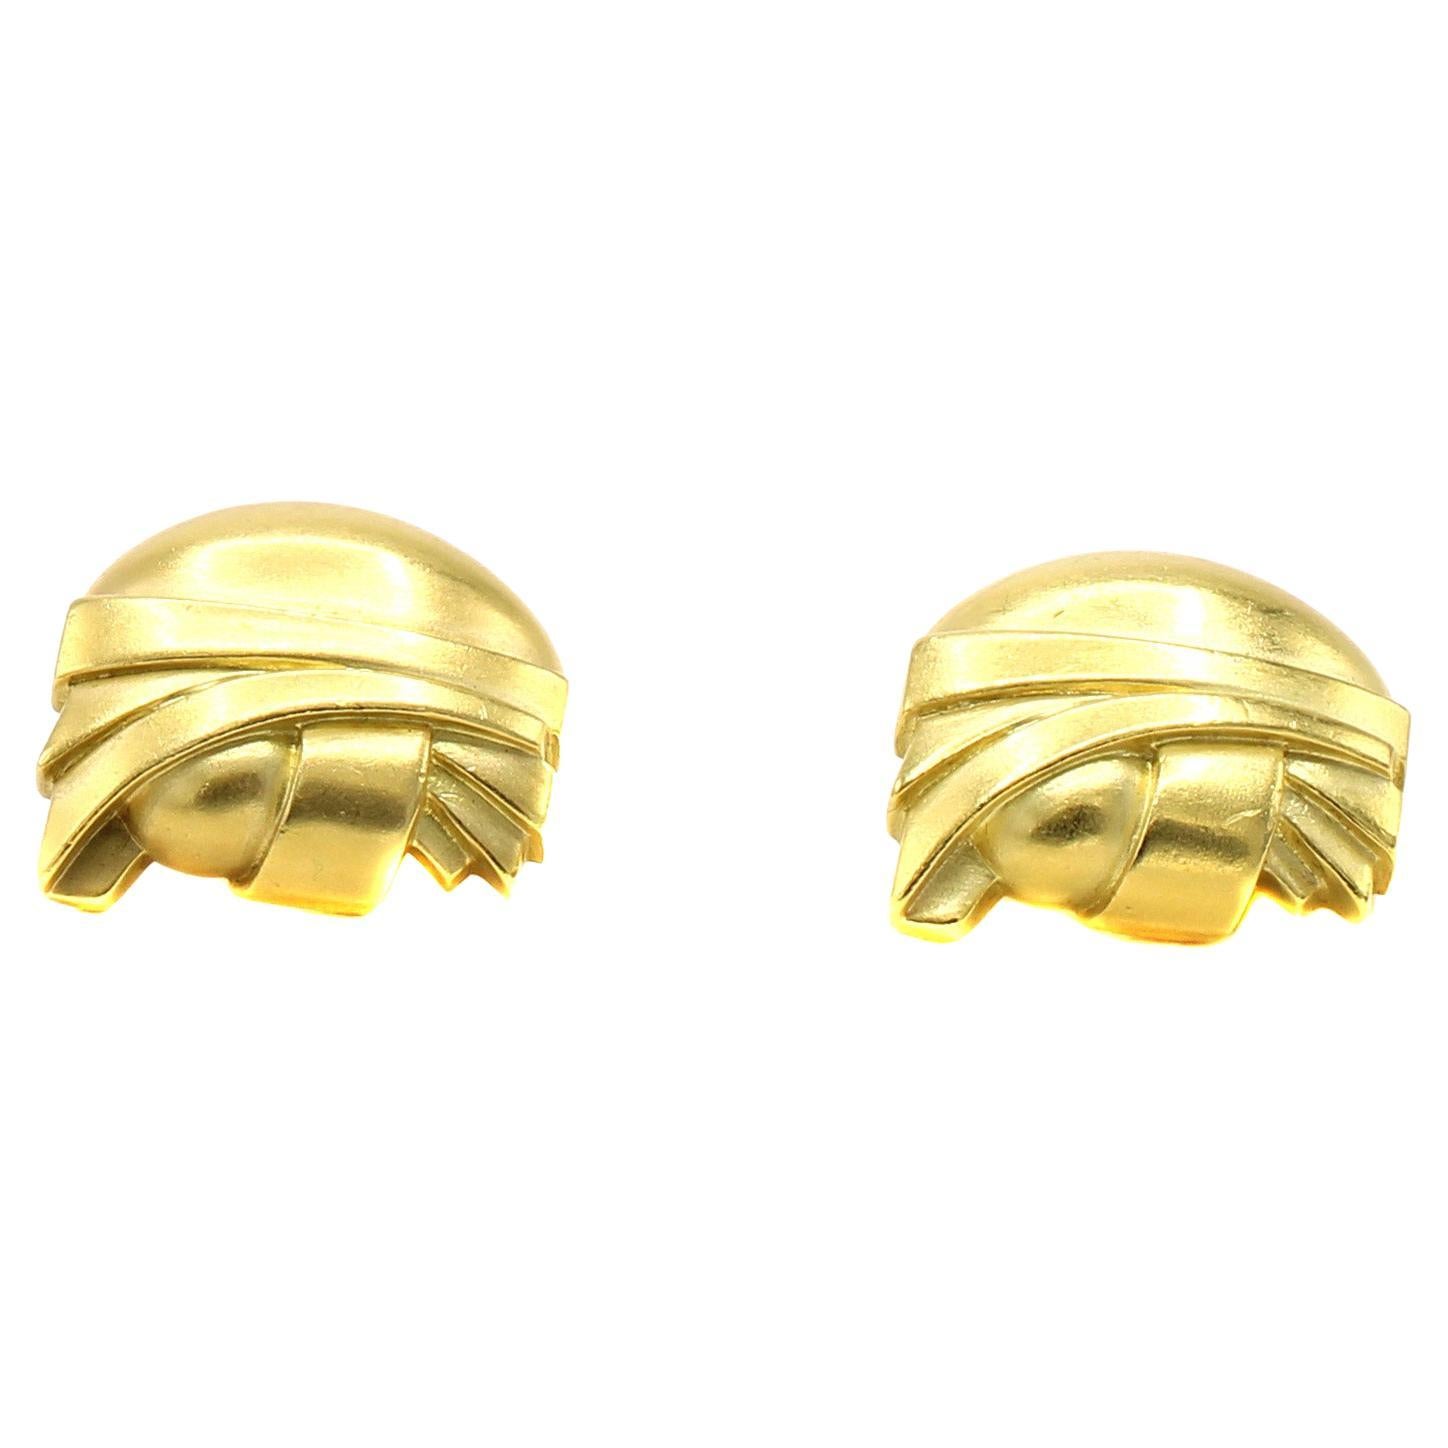 Beautifully designed and masterfully handcrafted by the iconic American jeweler Barry Kieselstein-Cord, these large and impressive ear clips make a statement on every ear. The distinctive matt finish of the green toned gold and architectural design